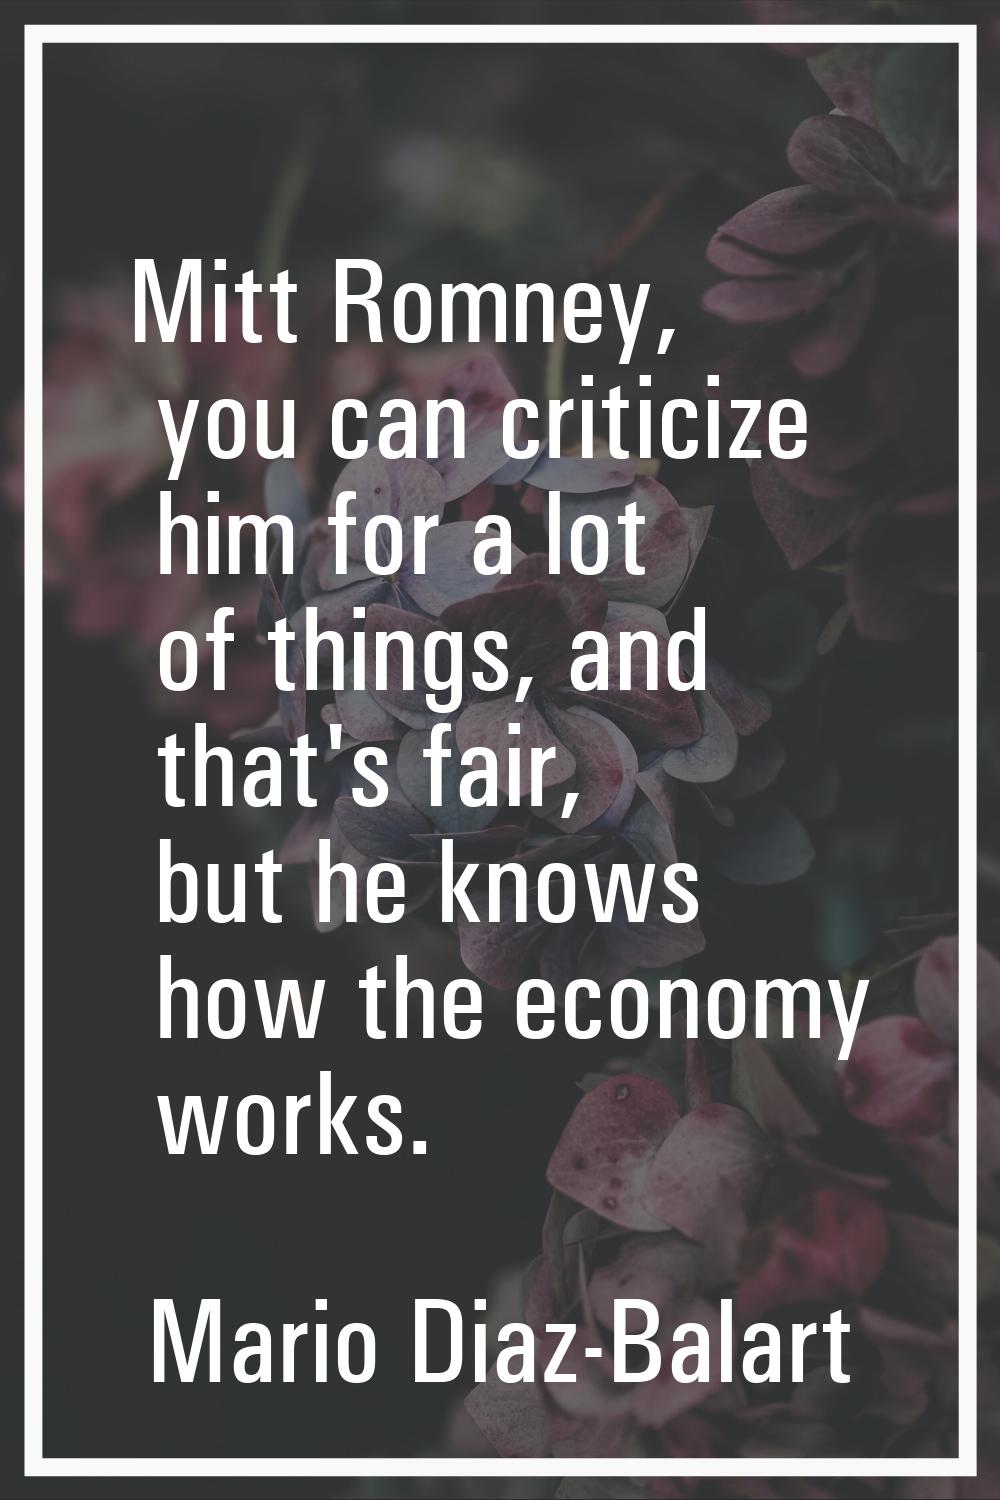 Mitt Romney, you can criticize him for a lot of things, and that's fair, but he knows how the econo